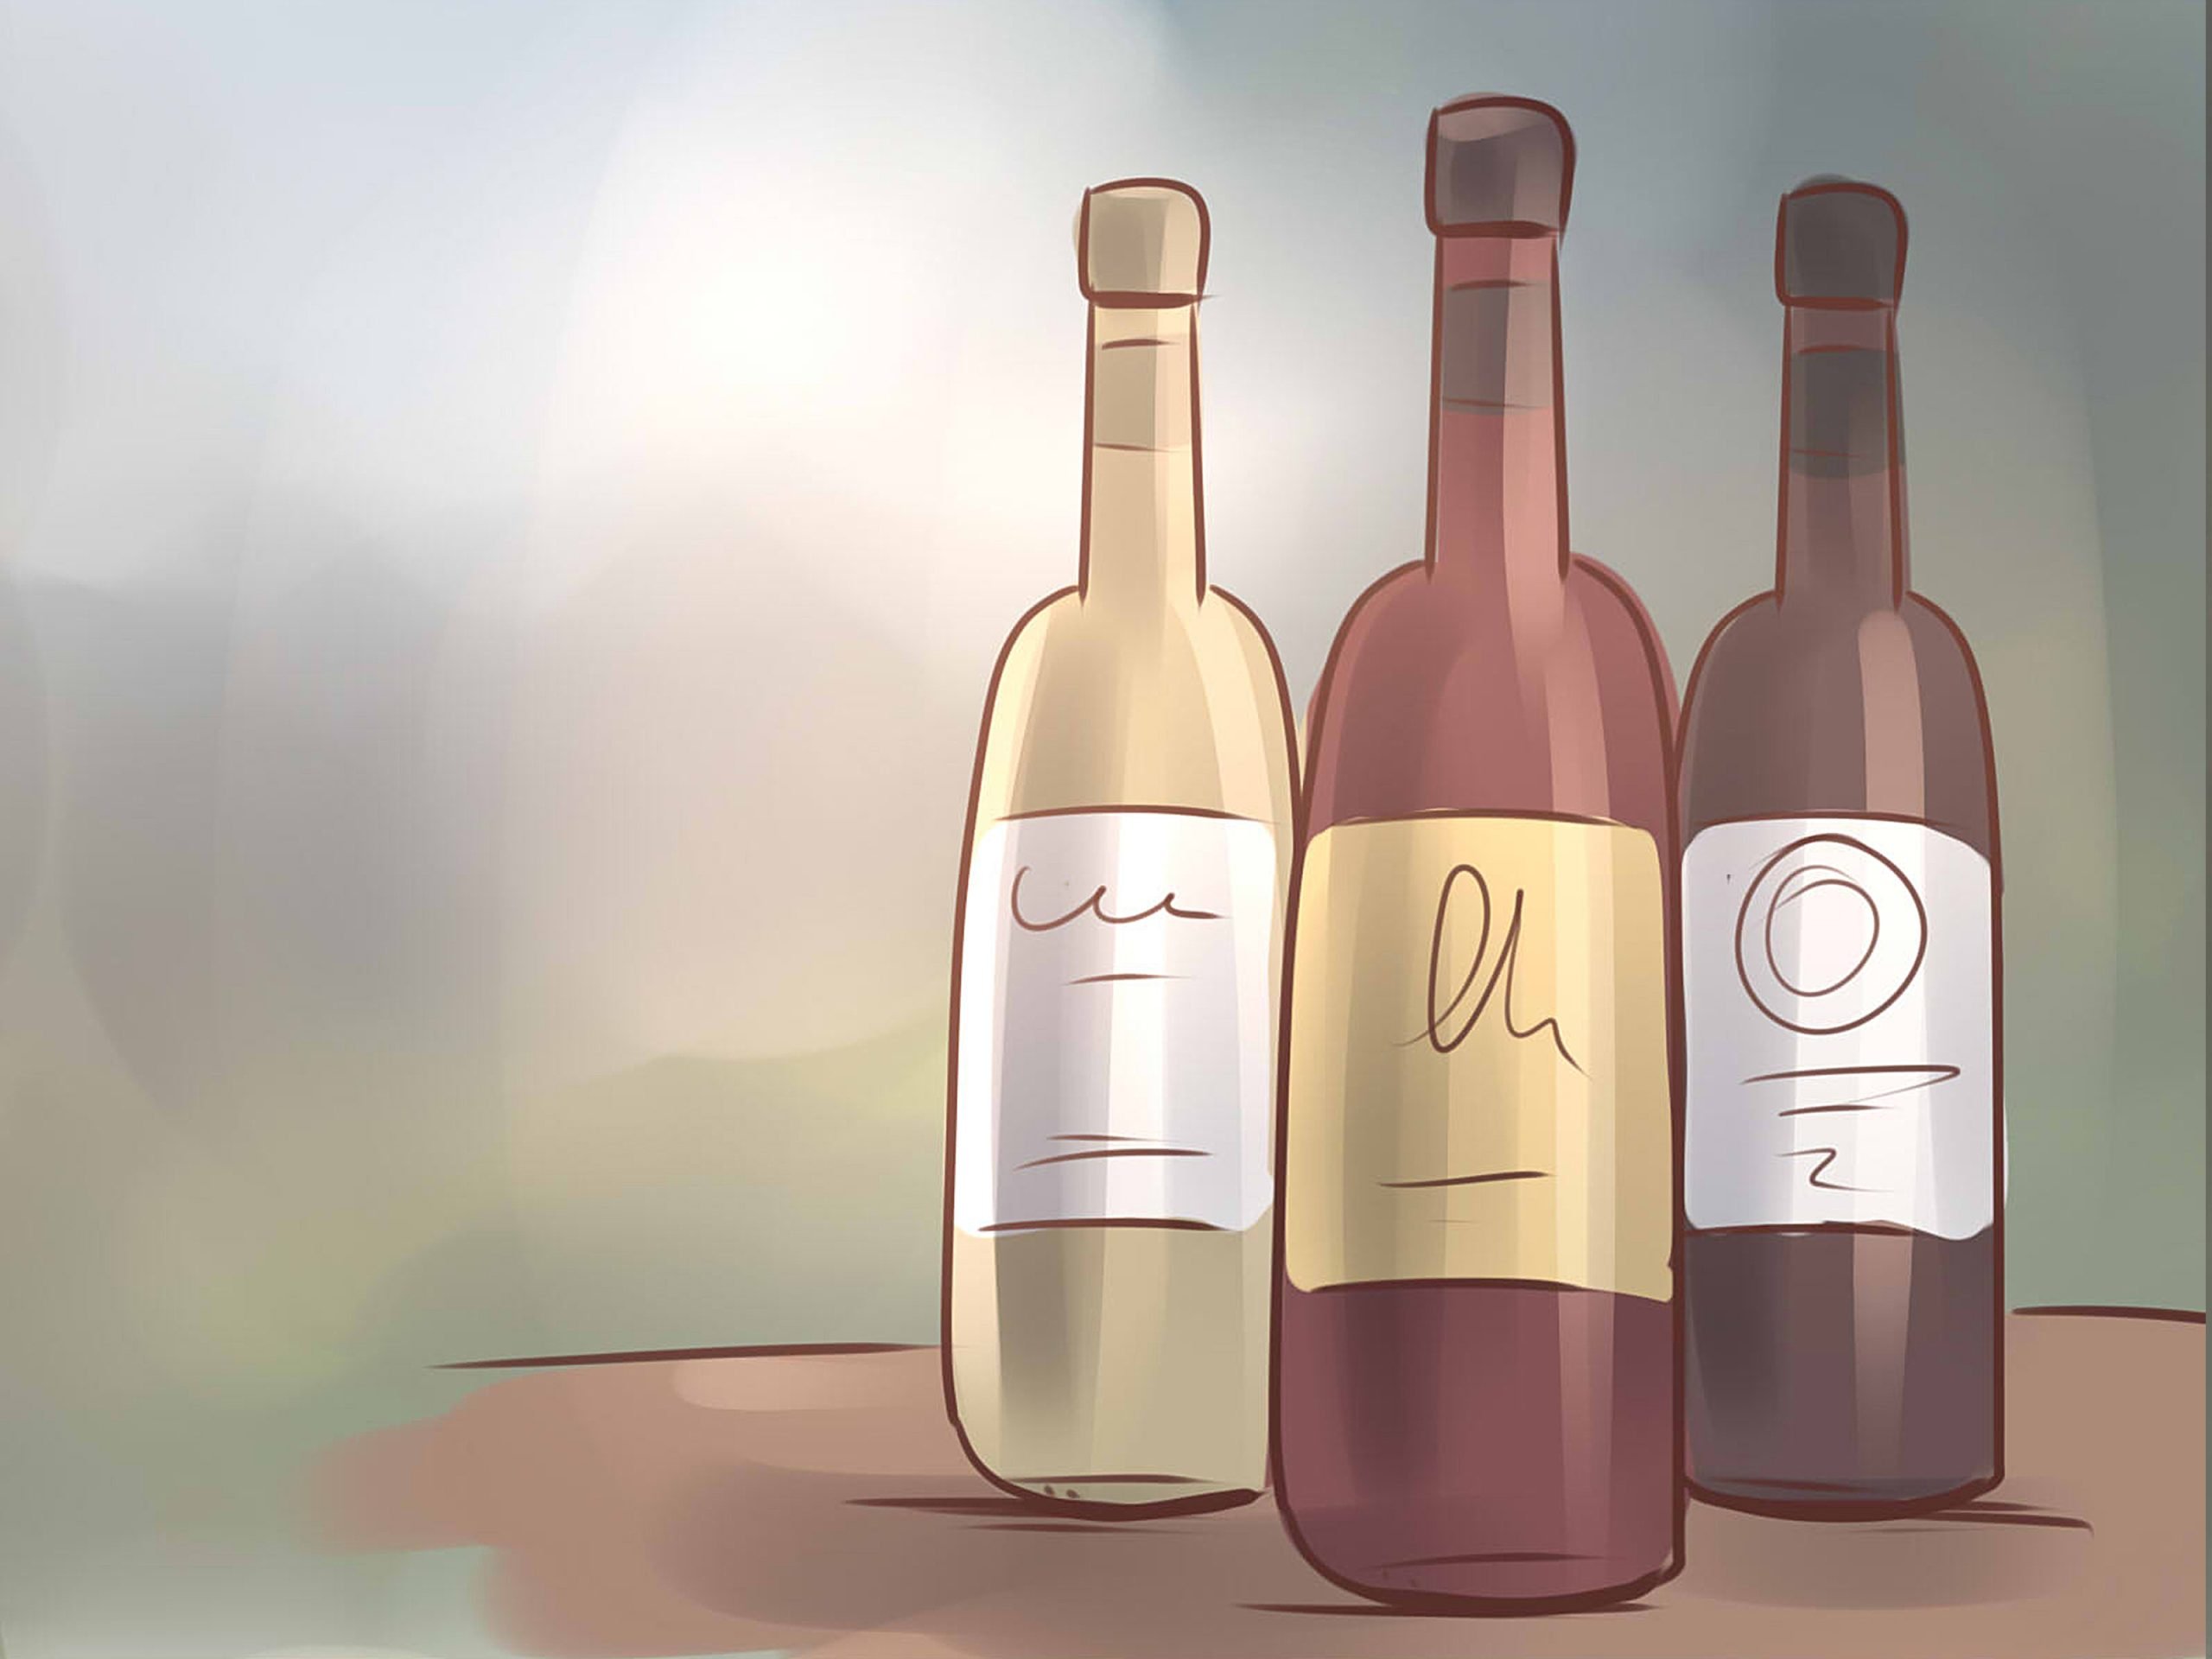 How to Buy Good Wine: 14 Steps (with Pictures)